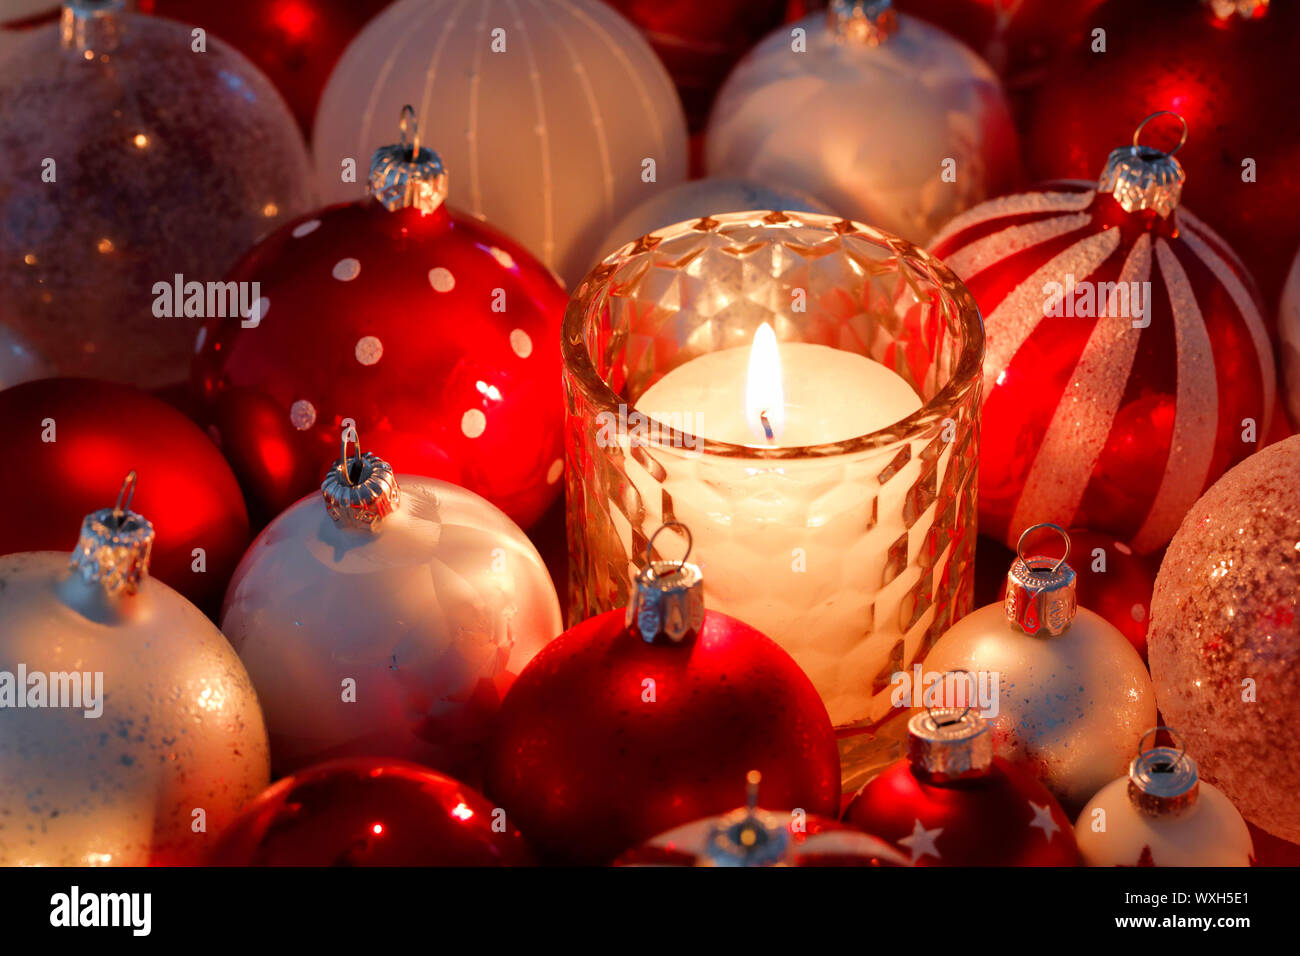 Christmas decoration: Burning candle in a galss surrounded by red and white Christmas baubles. Switzerland Stock Photo